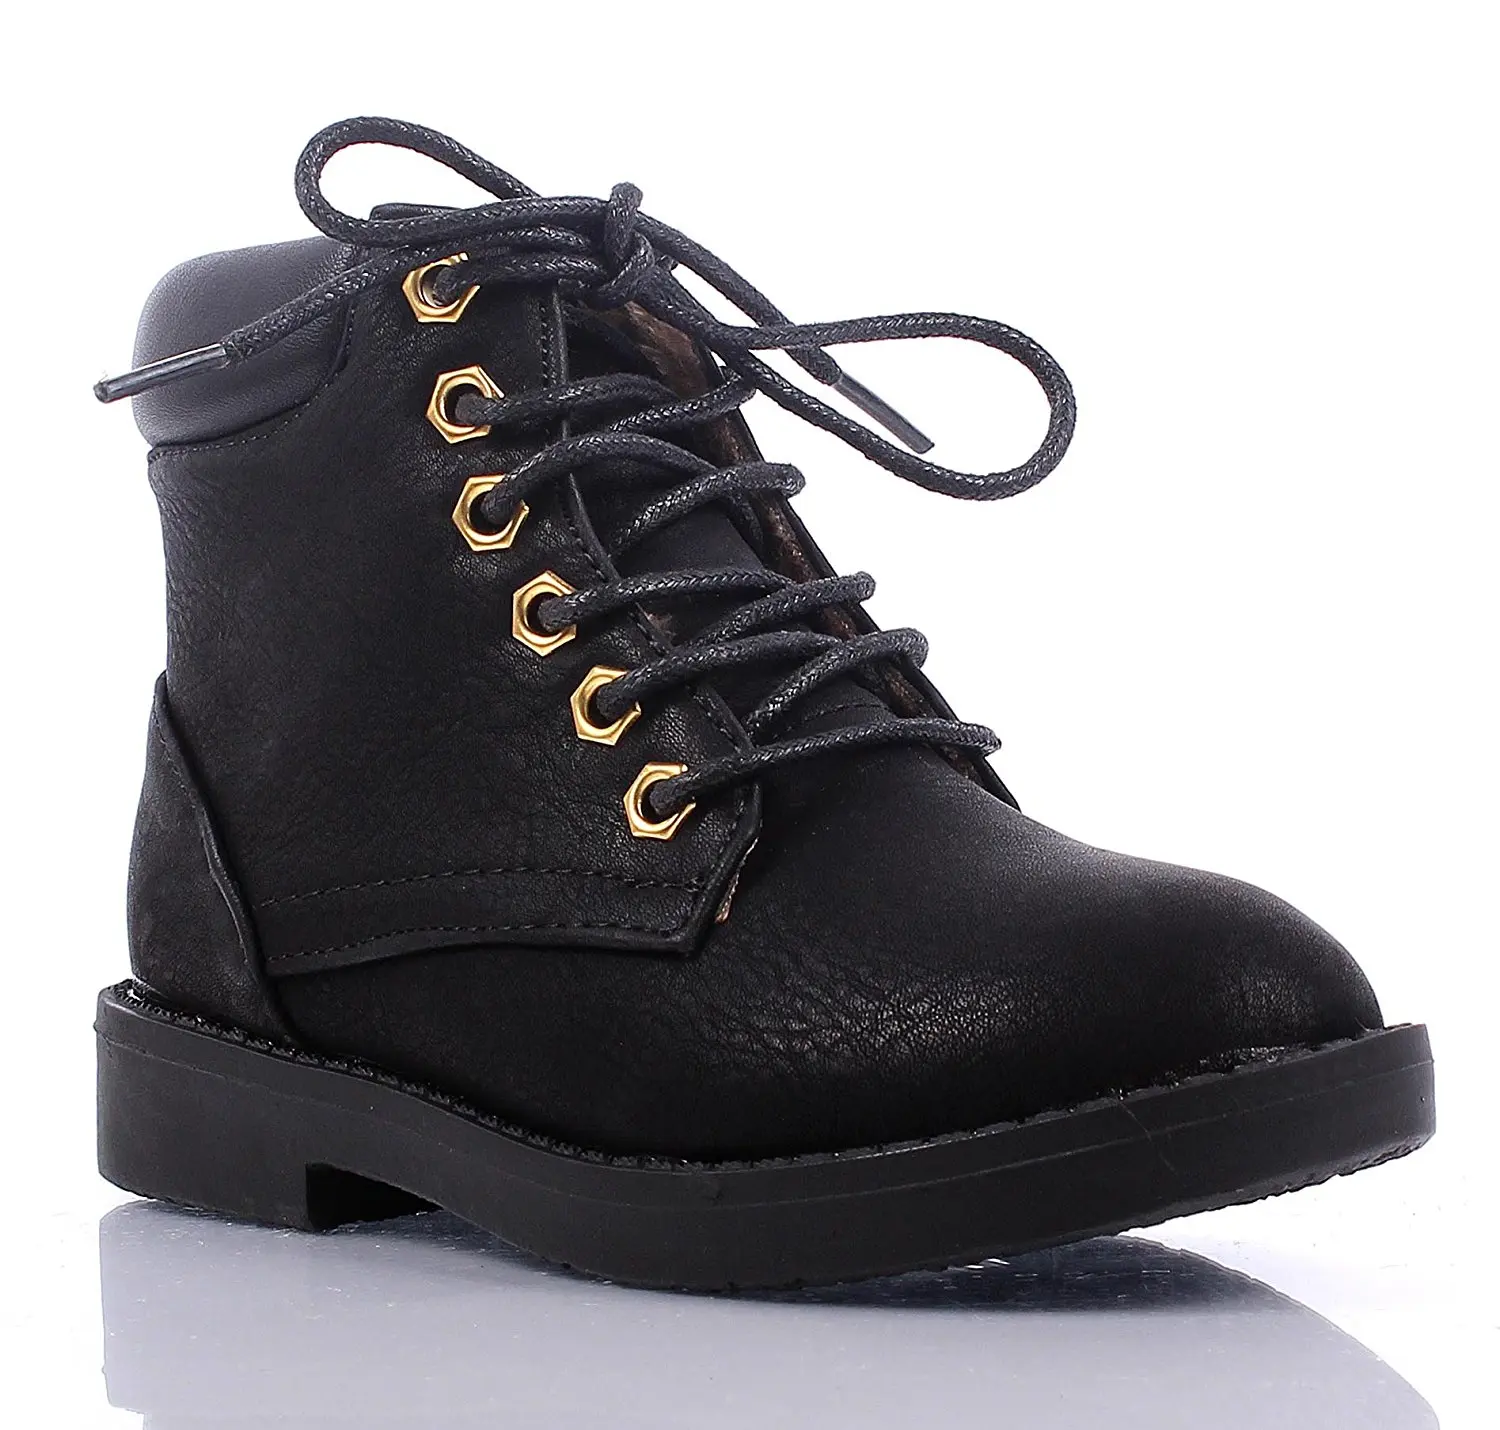 youth military boots